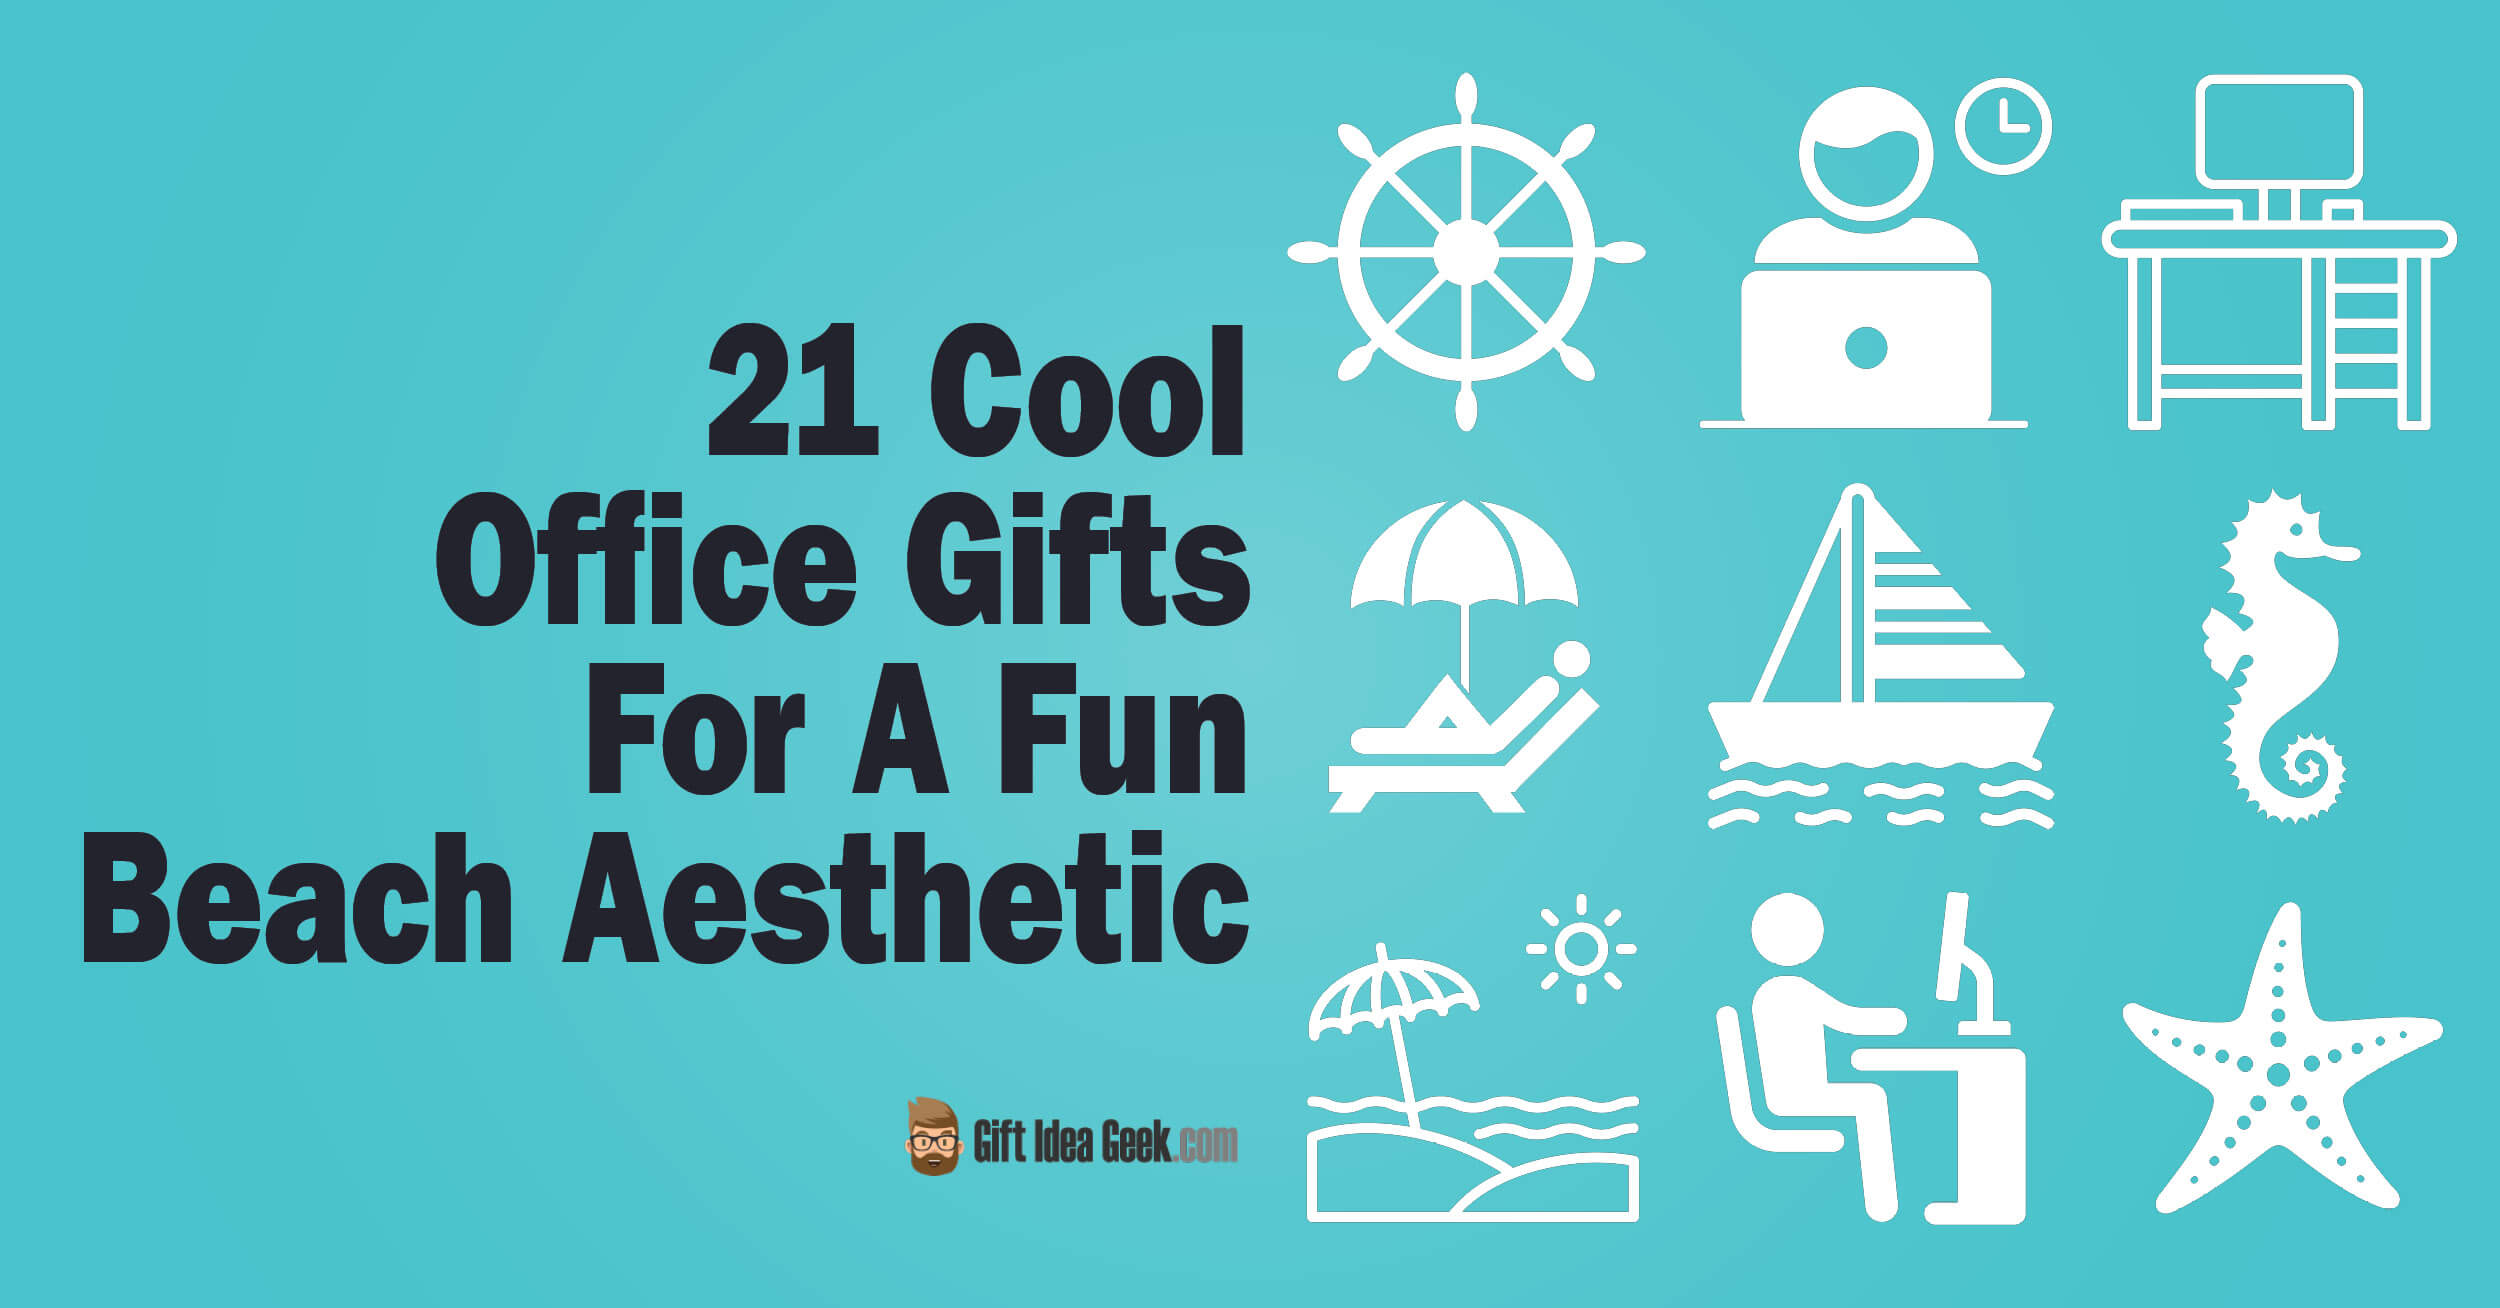 21 Cool Office Gifts For A Fun Beach Aesthetic